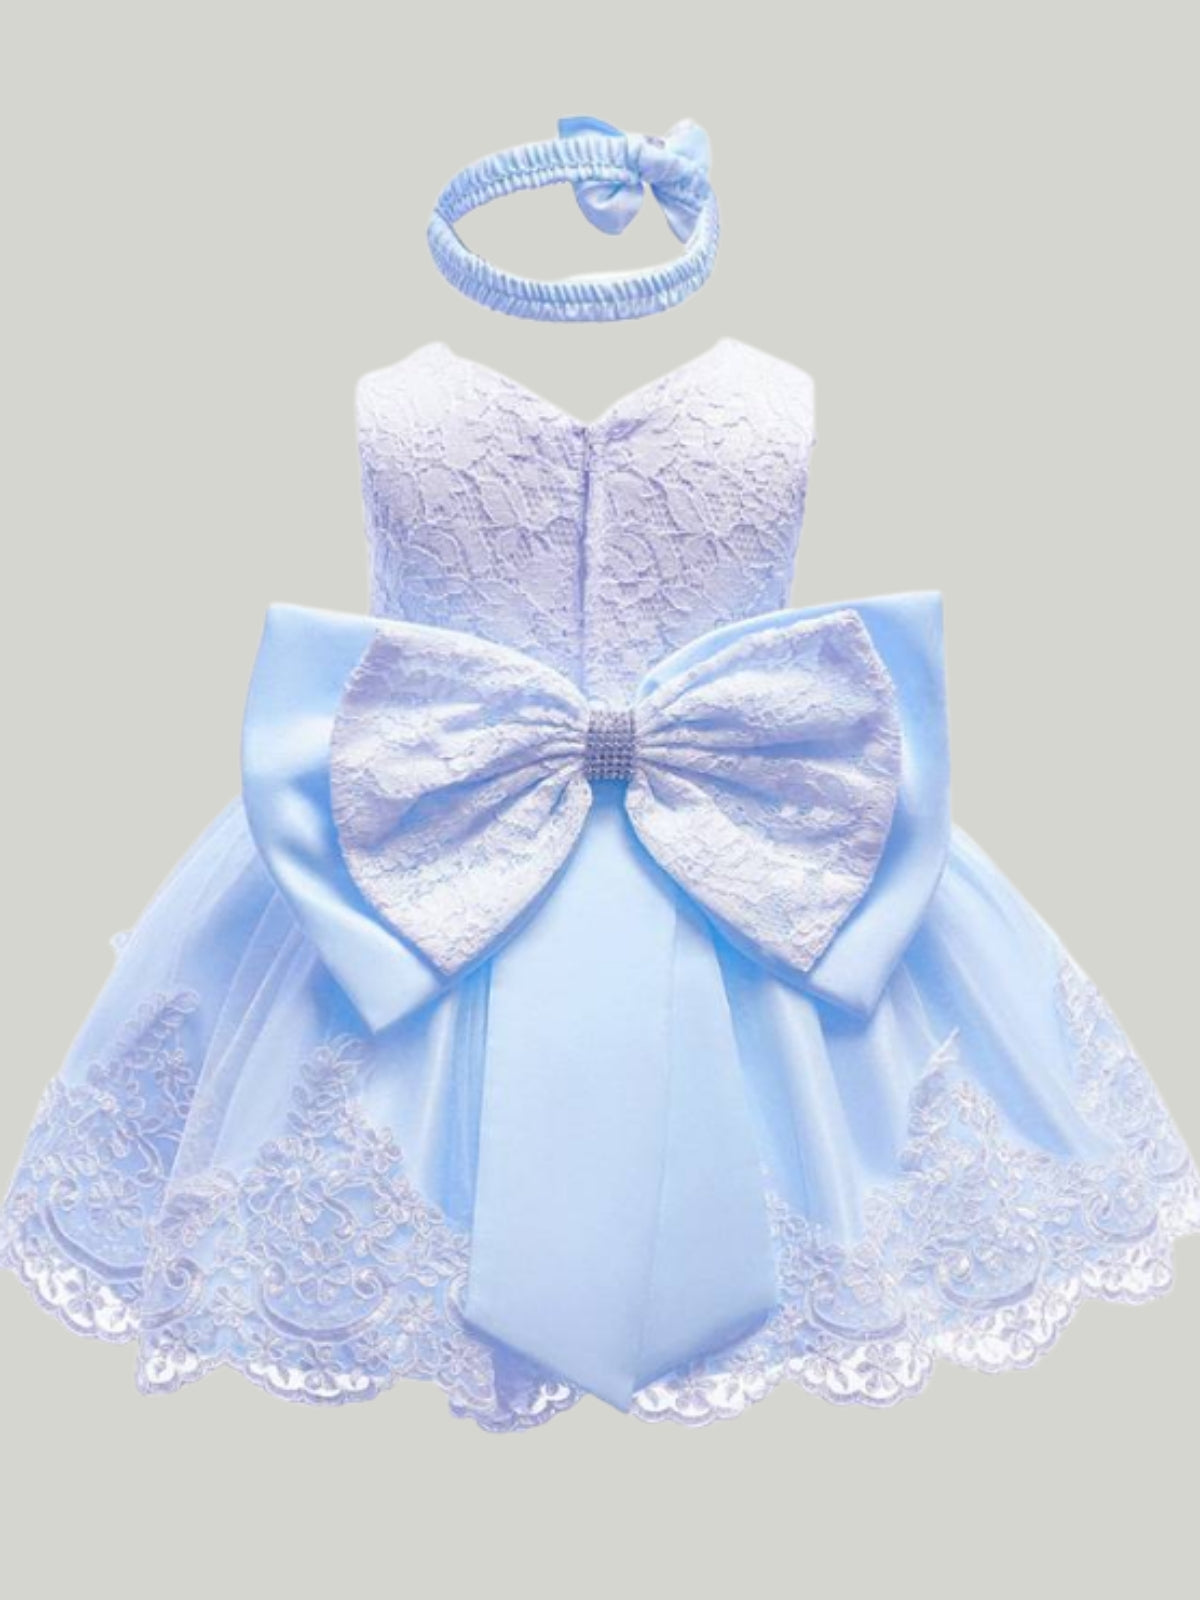 Baby Spring dress has a short-sleeved lace bodice and a skirt with lace hem and a big bow on the back, comes with a matching headband